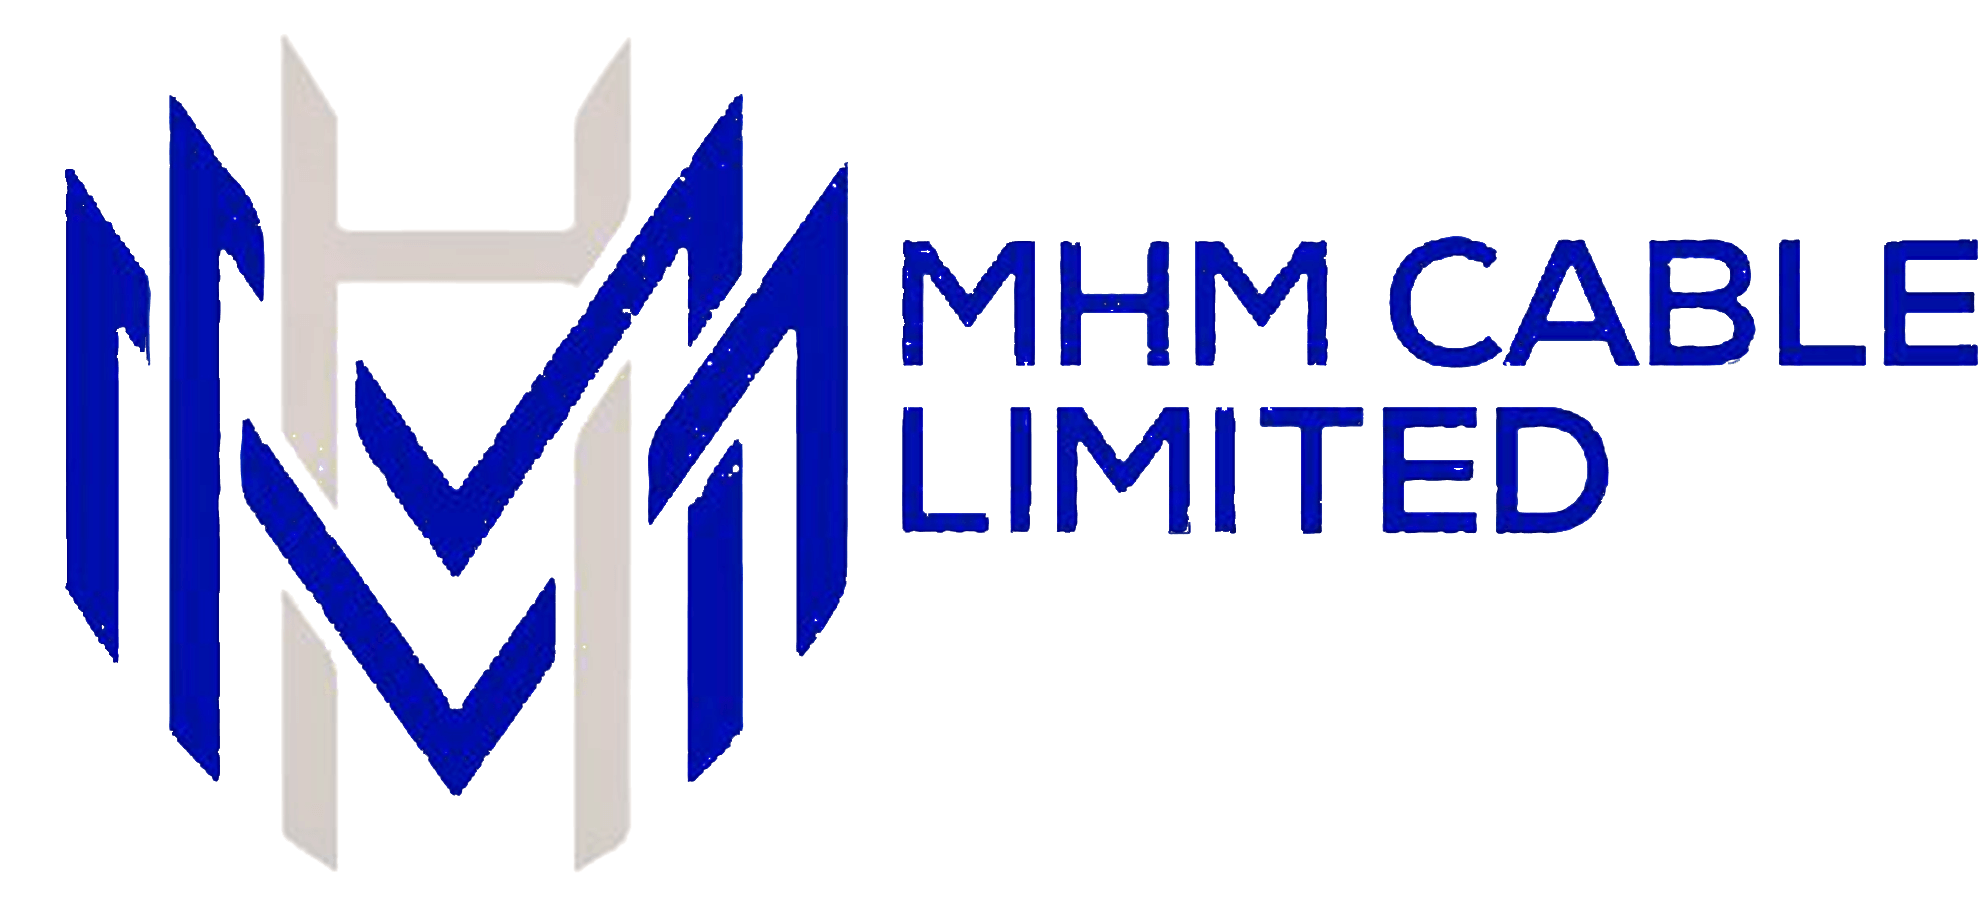 mhmcable limited logo